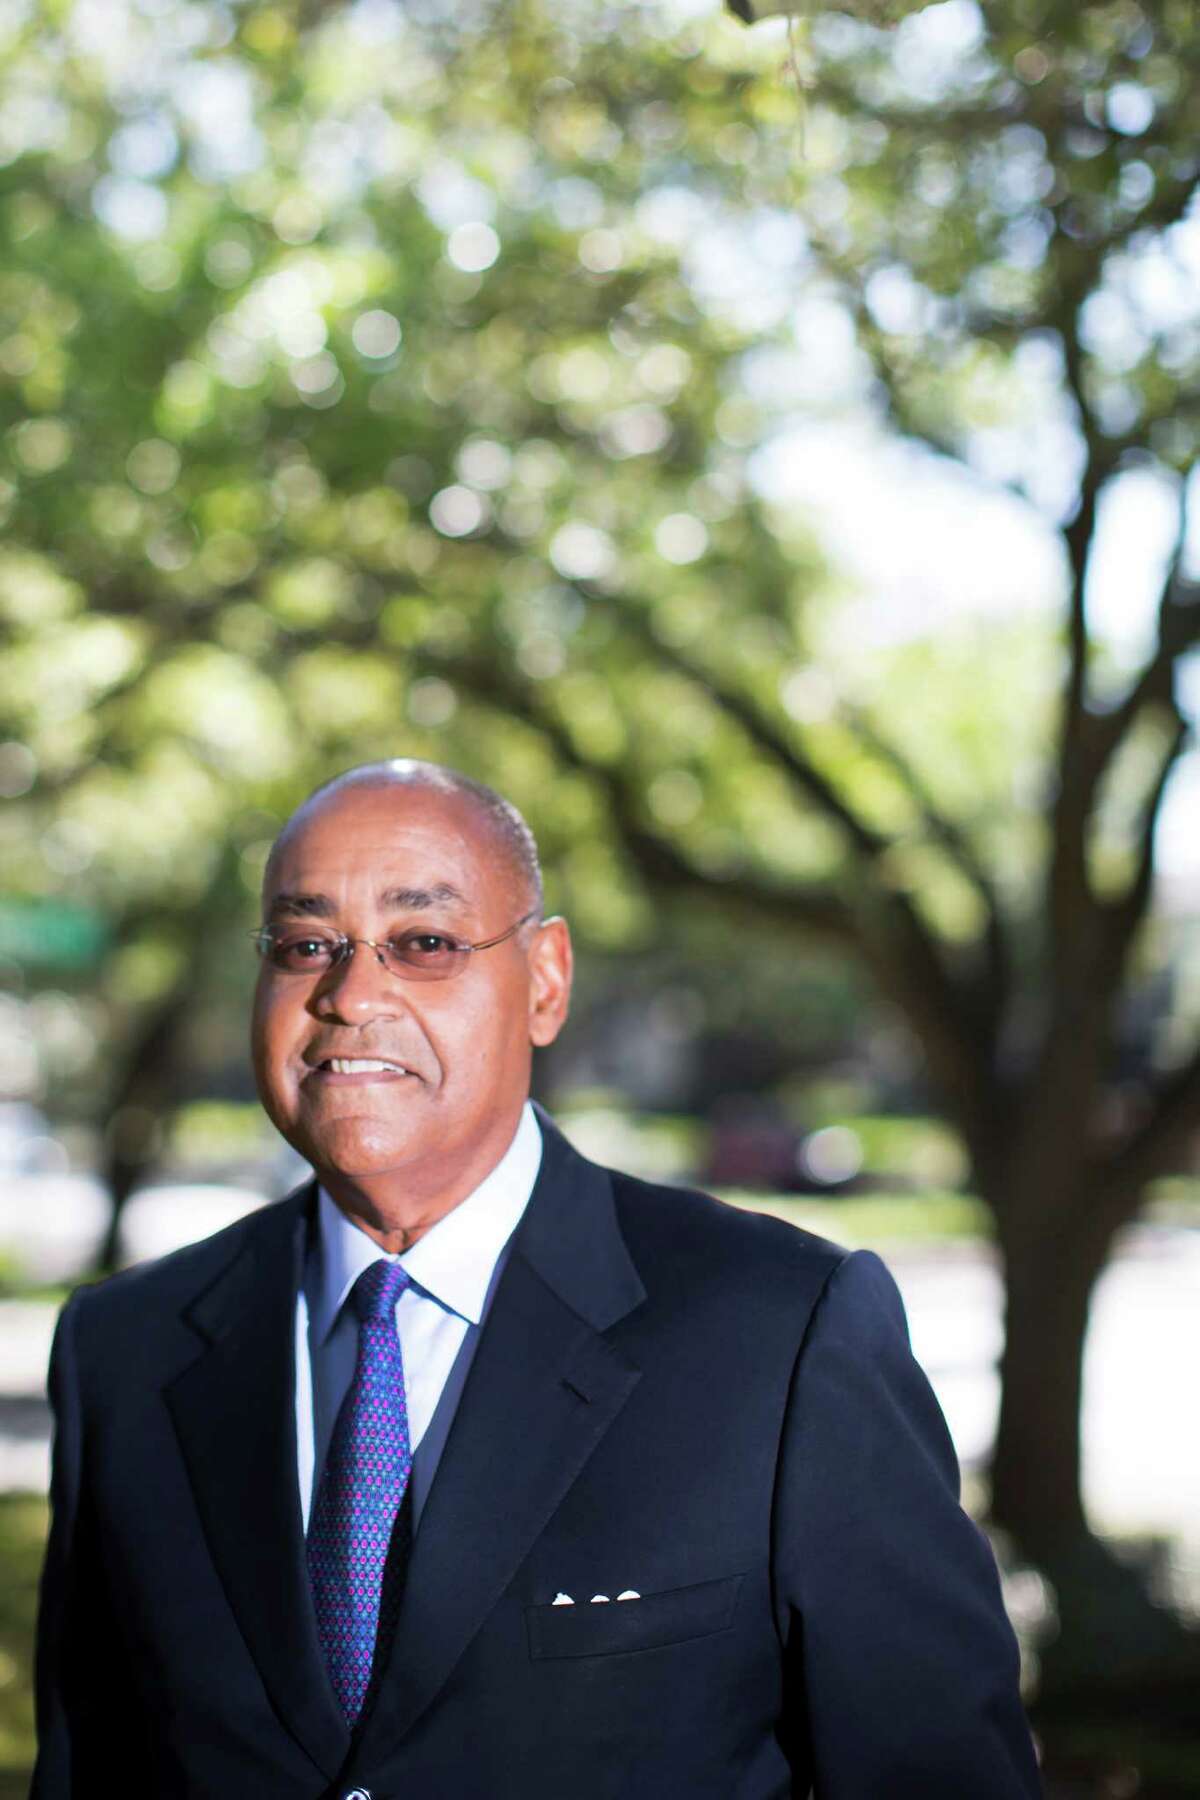 Senator Rodney Ellis is the state senator for Texas' 13th state senate district. The district contains portions of Harris County, including downtown Houston, and Fort Bend County. He is a member of the Democratic Party. Friday, March 25, 2016, in Housto. ( Marie D. De Jesus / Houston Chronicle )